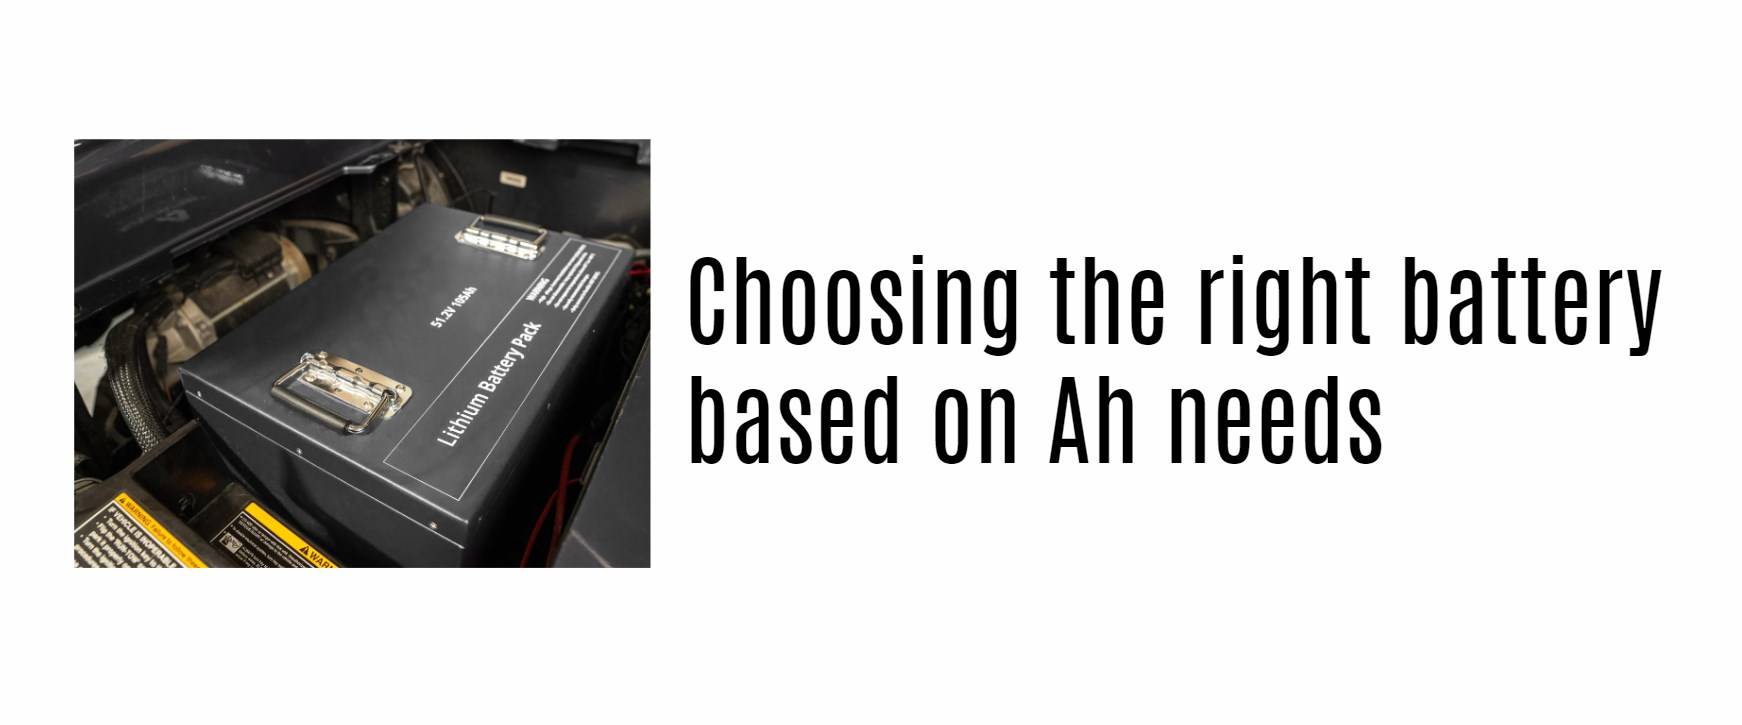 Choosing the right battery based on Ah needs